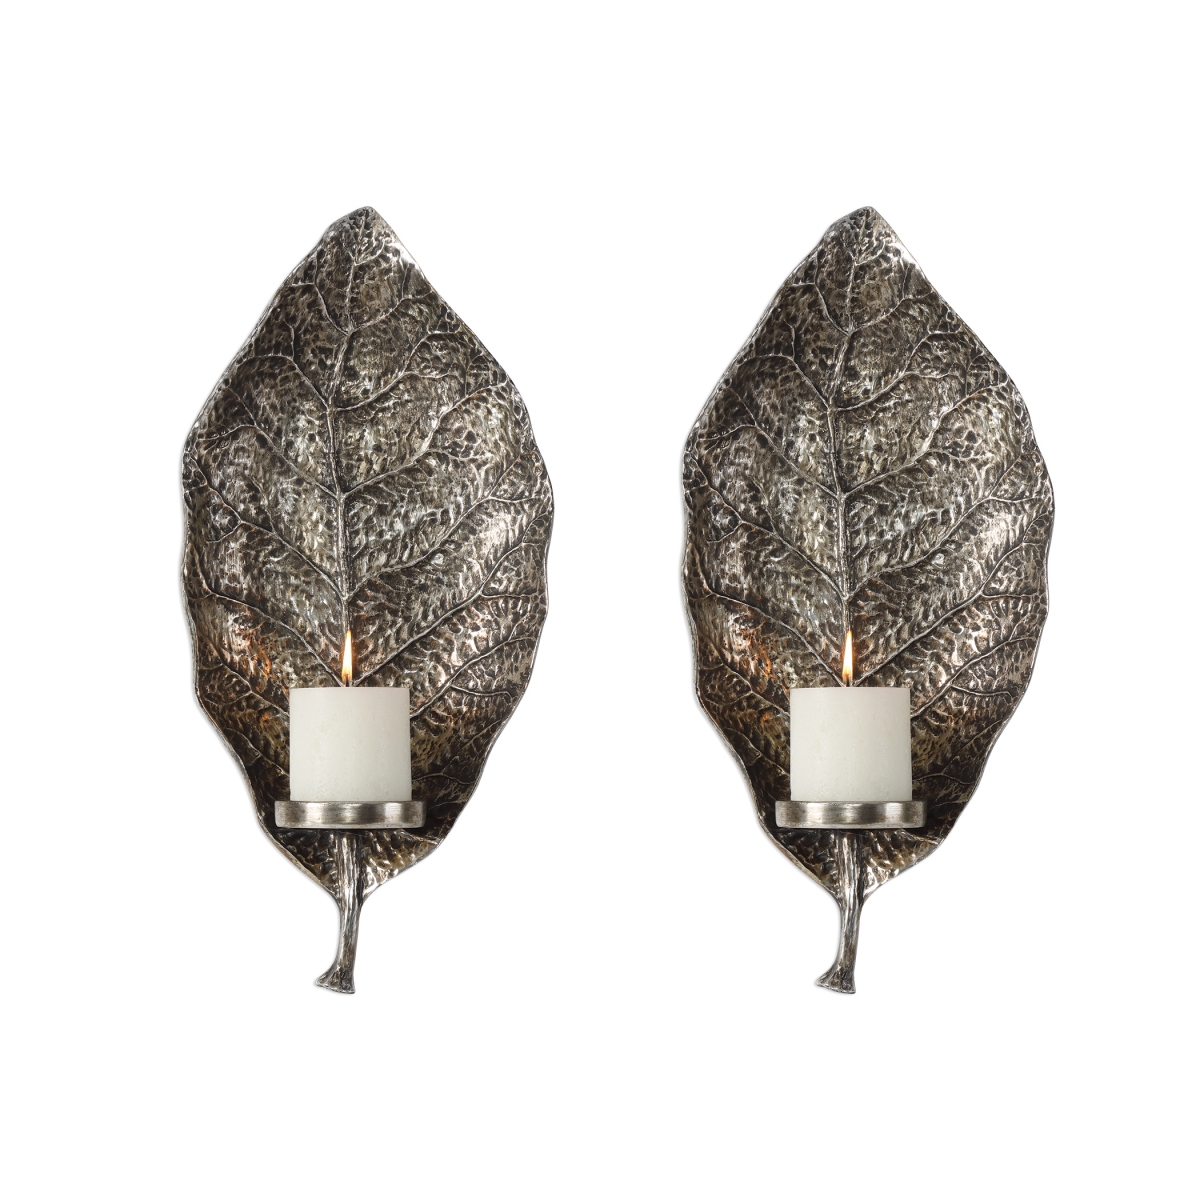 Picture of 212 Main 04138 Zelkova Leaf Wall Sconces  Set of 2